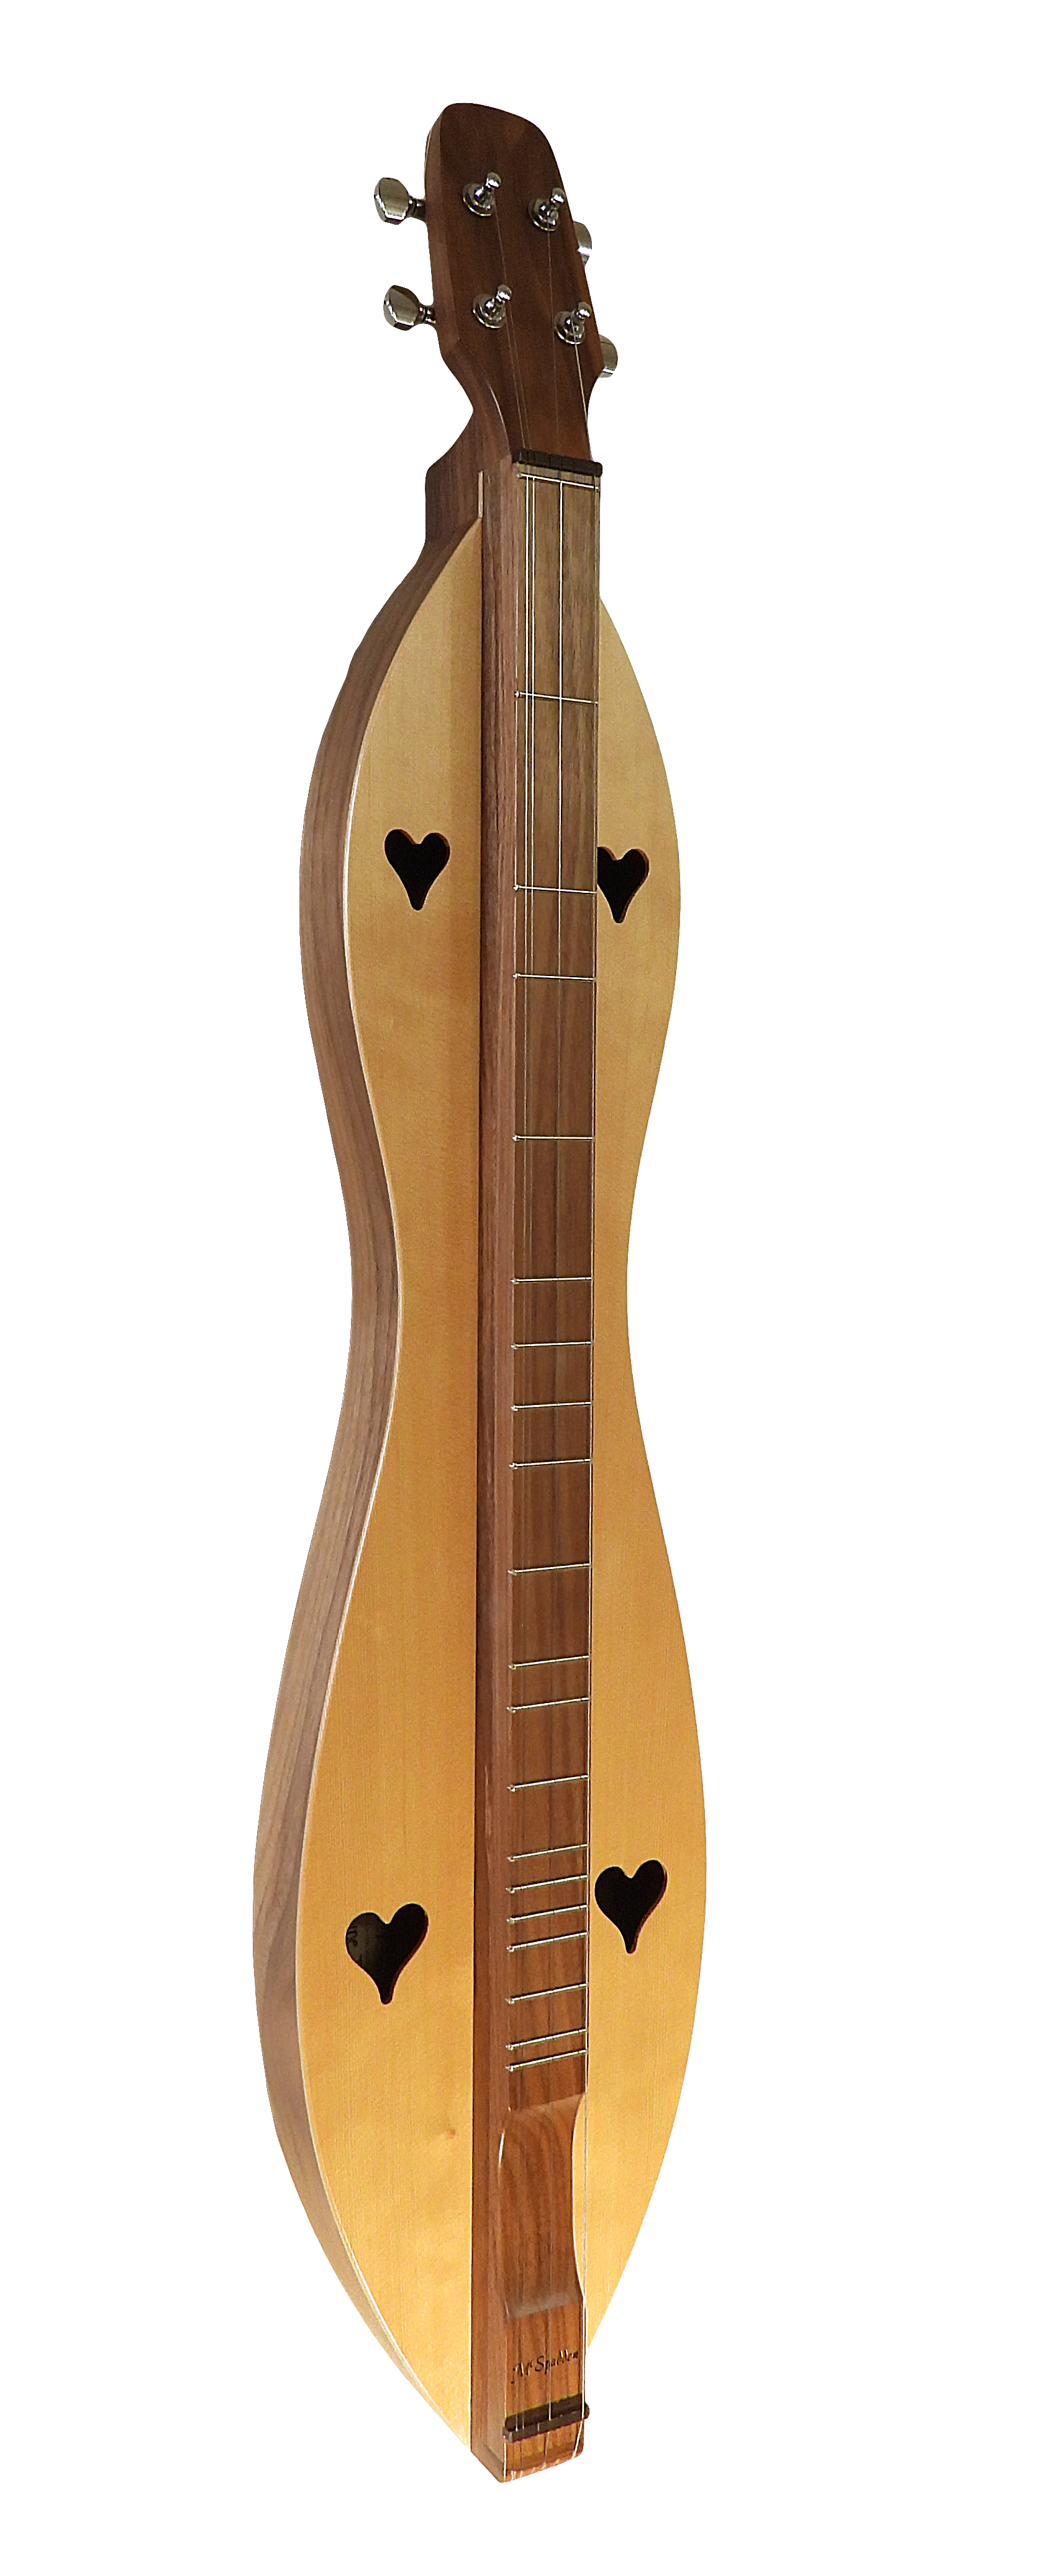 4 String, Flathead, Hourglass, with Walnut back and sides, Spruce top (4FHWS)